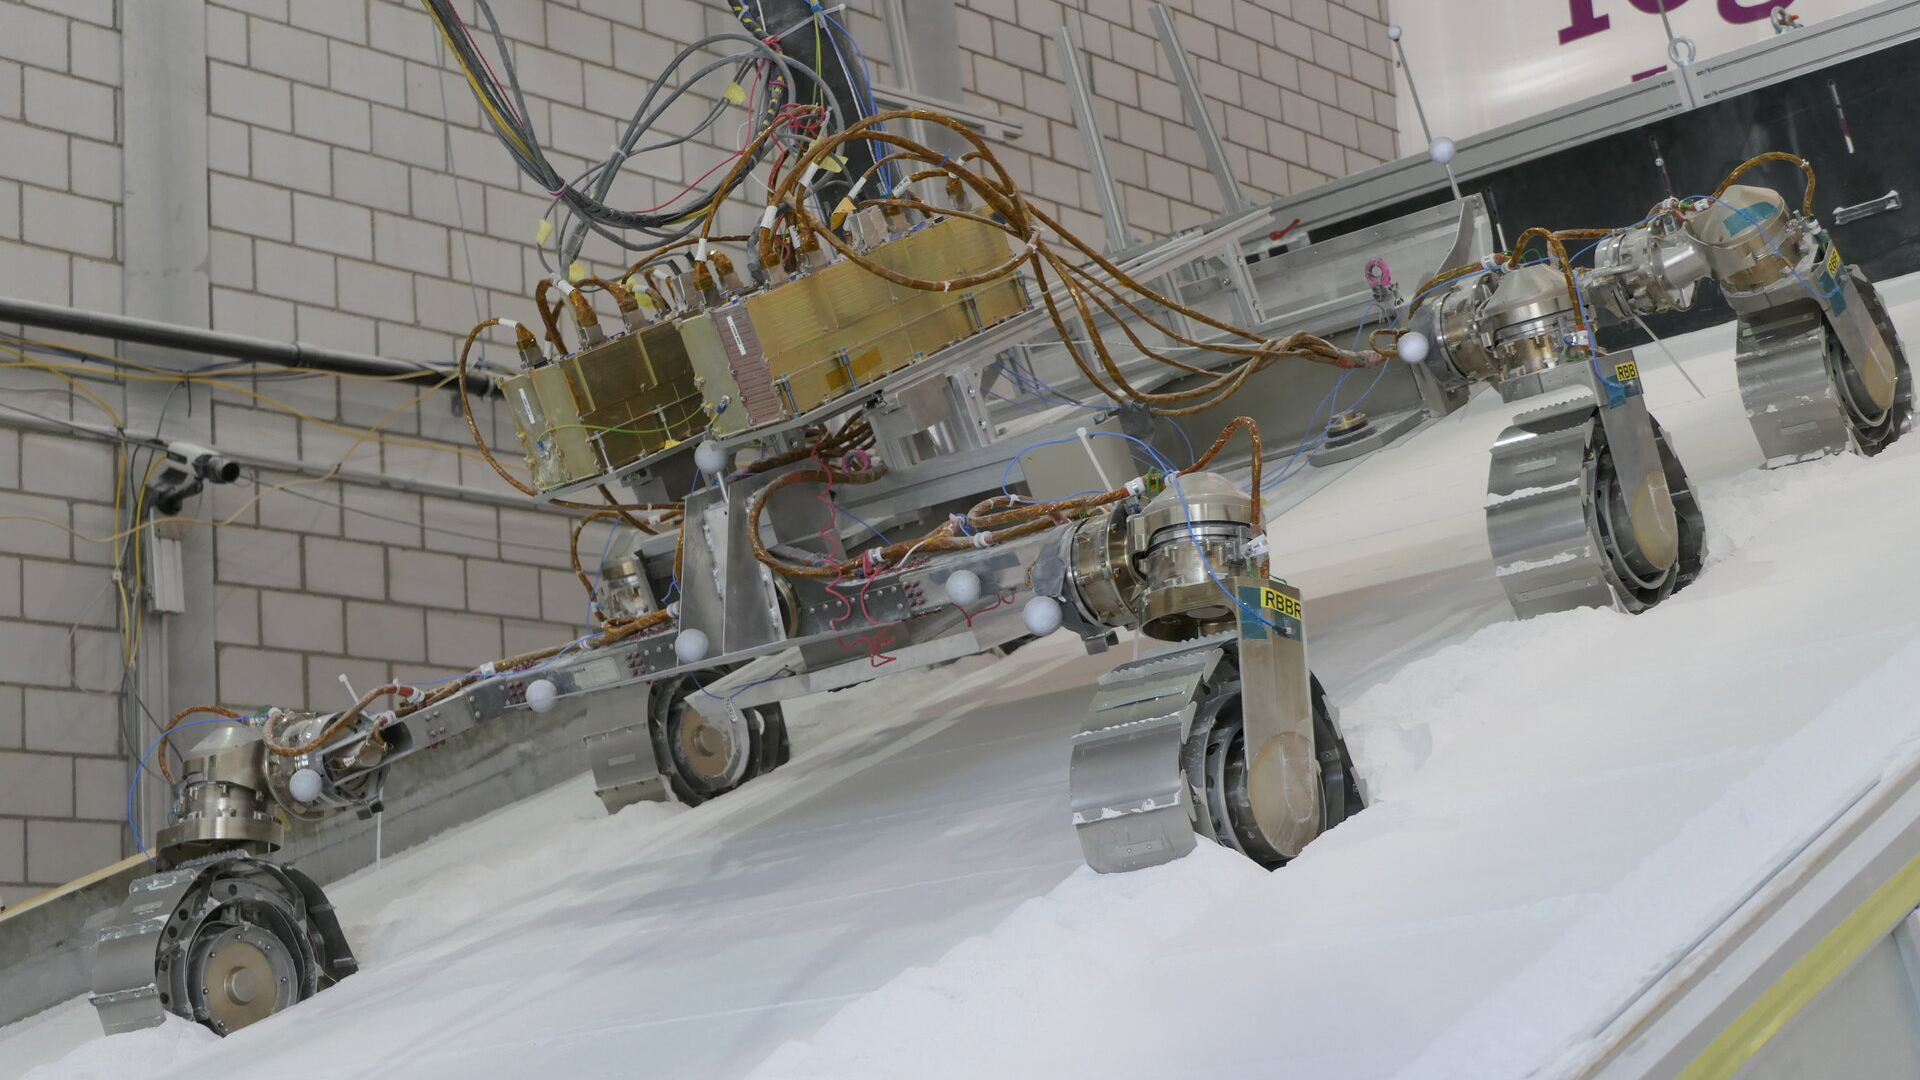 The ExoMars rover is equipped with six wheels, each on their own pivot so they can be steered individually.